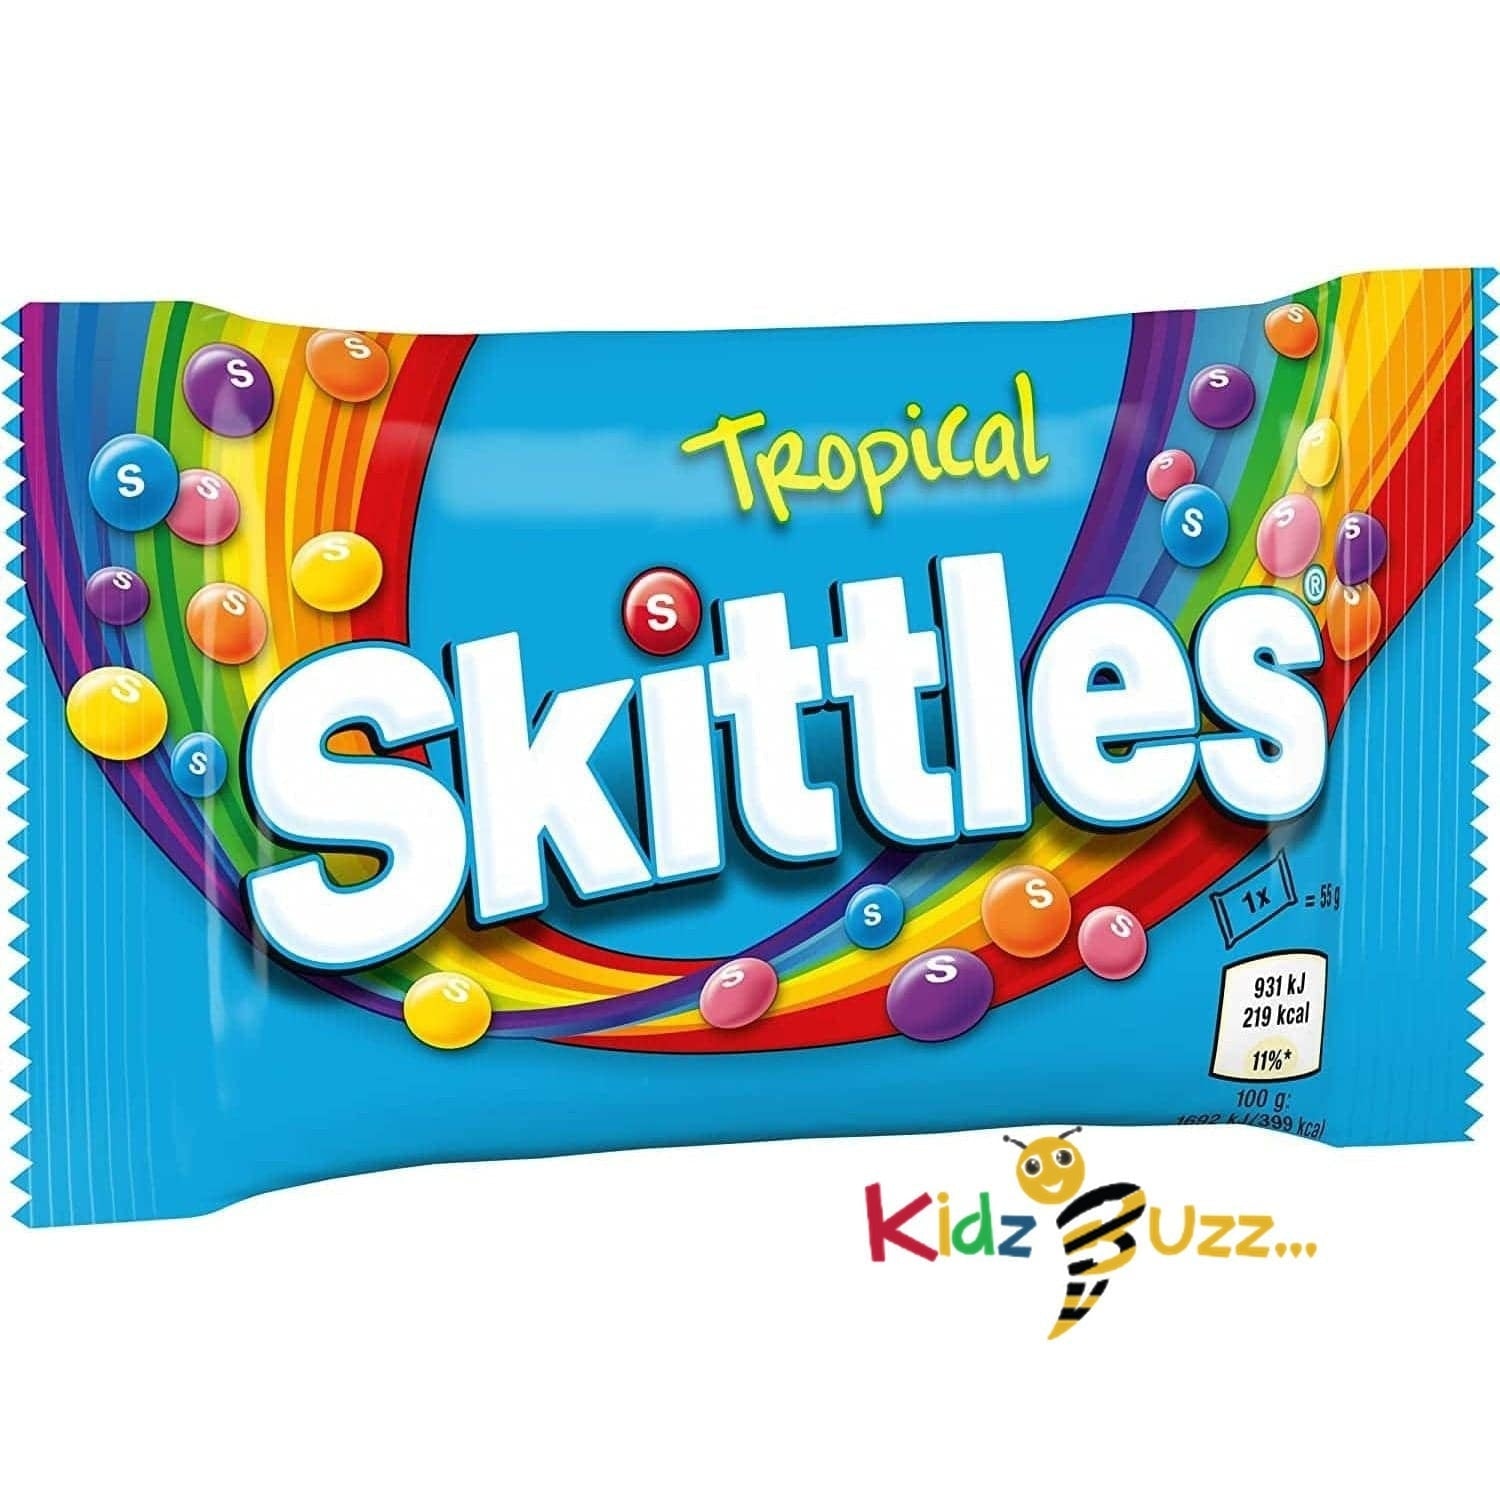 Skittles Tropical Candies Bag 55 g Pack of 36